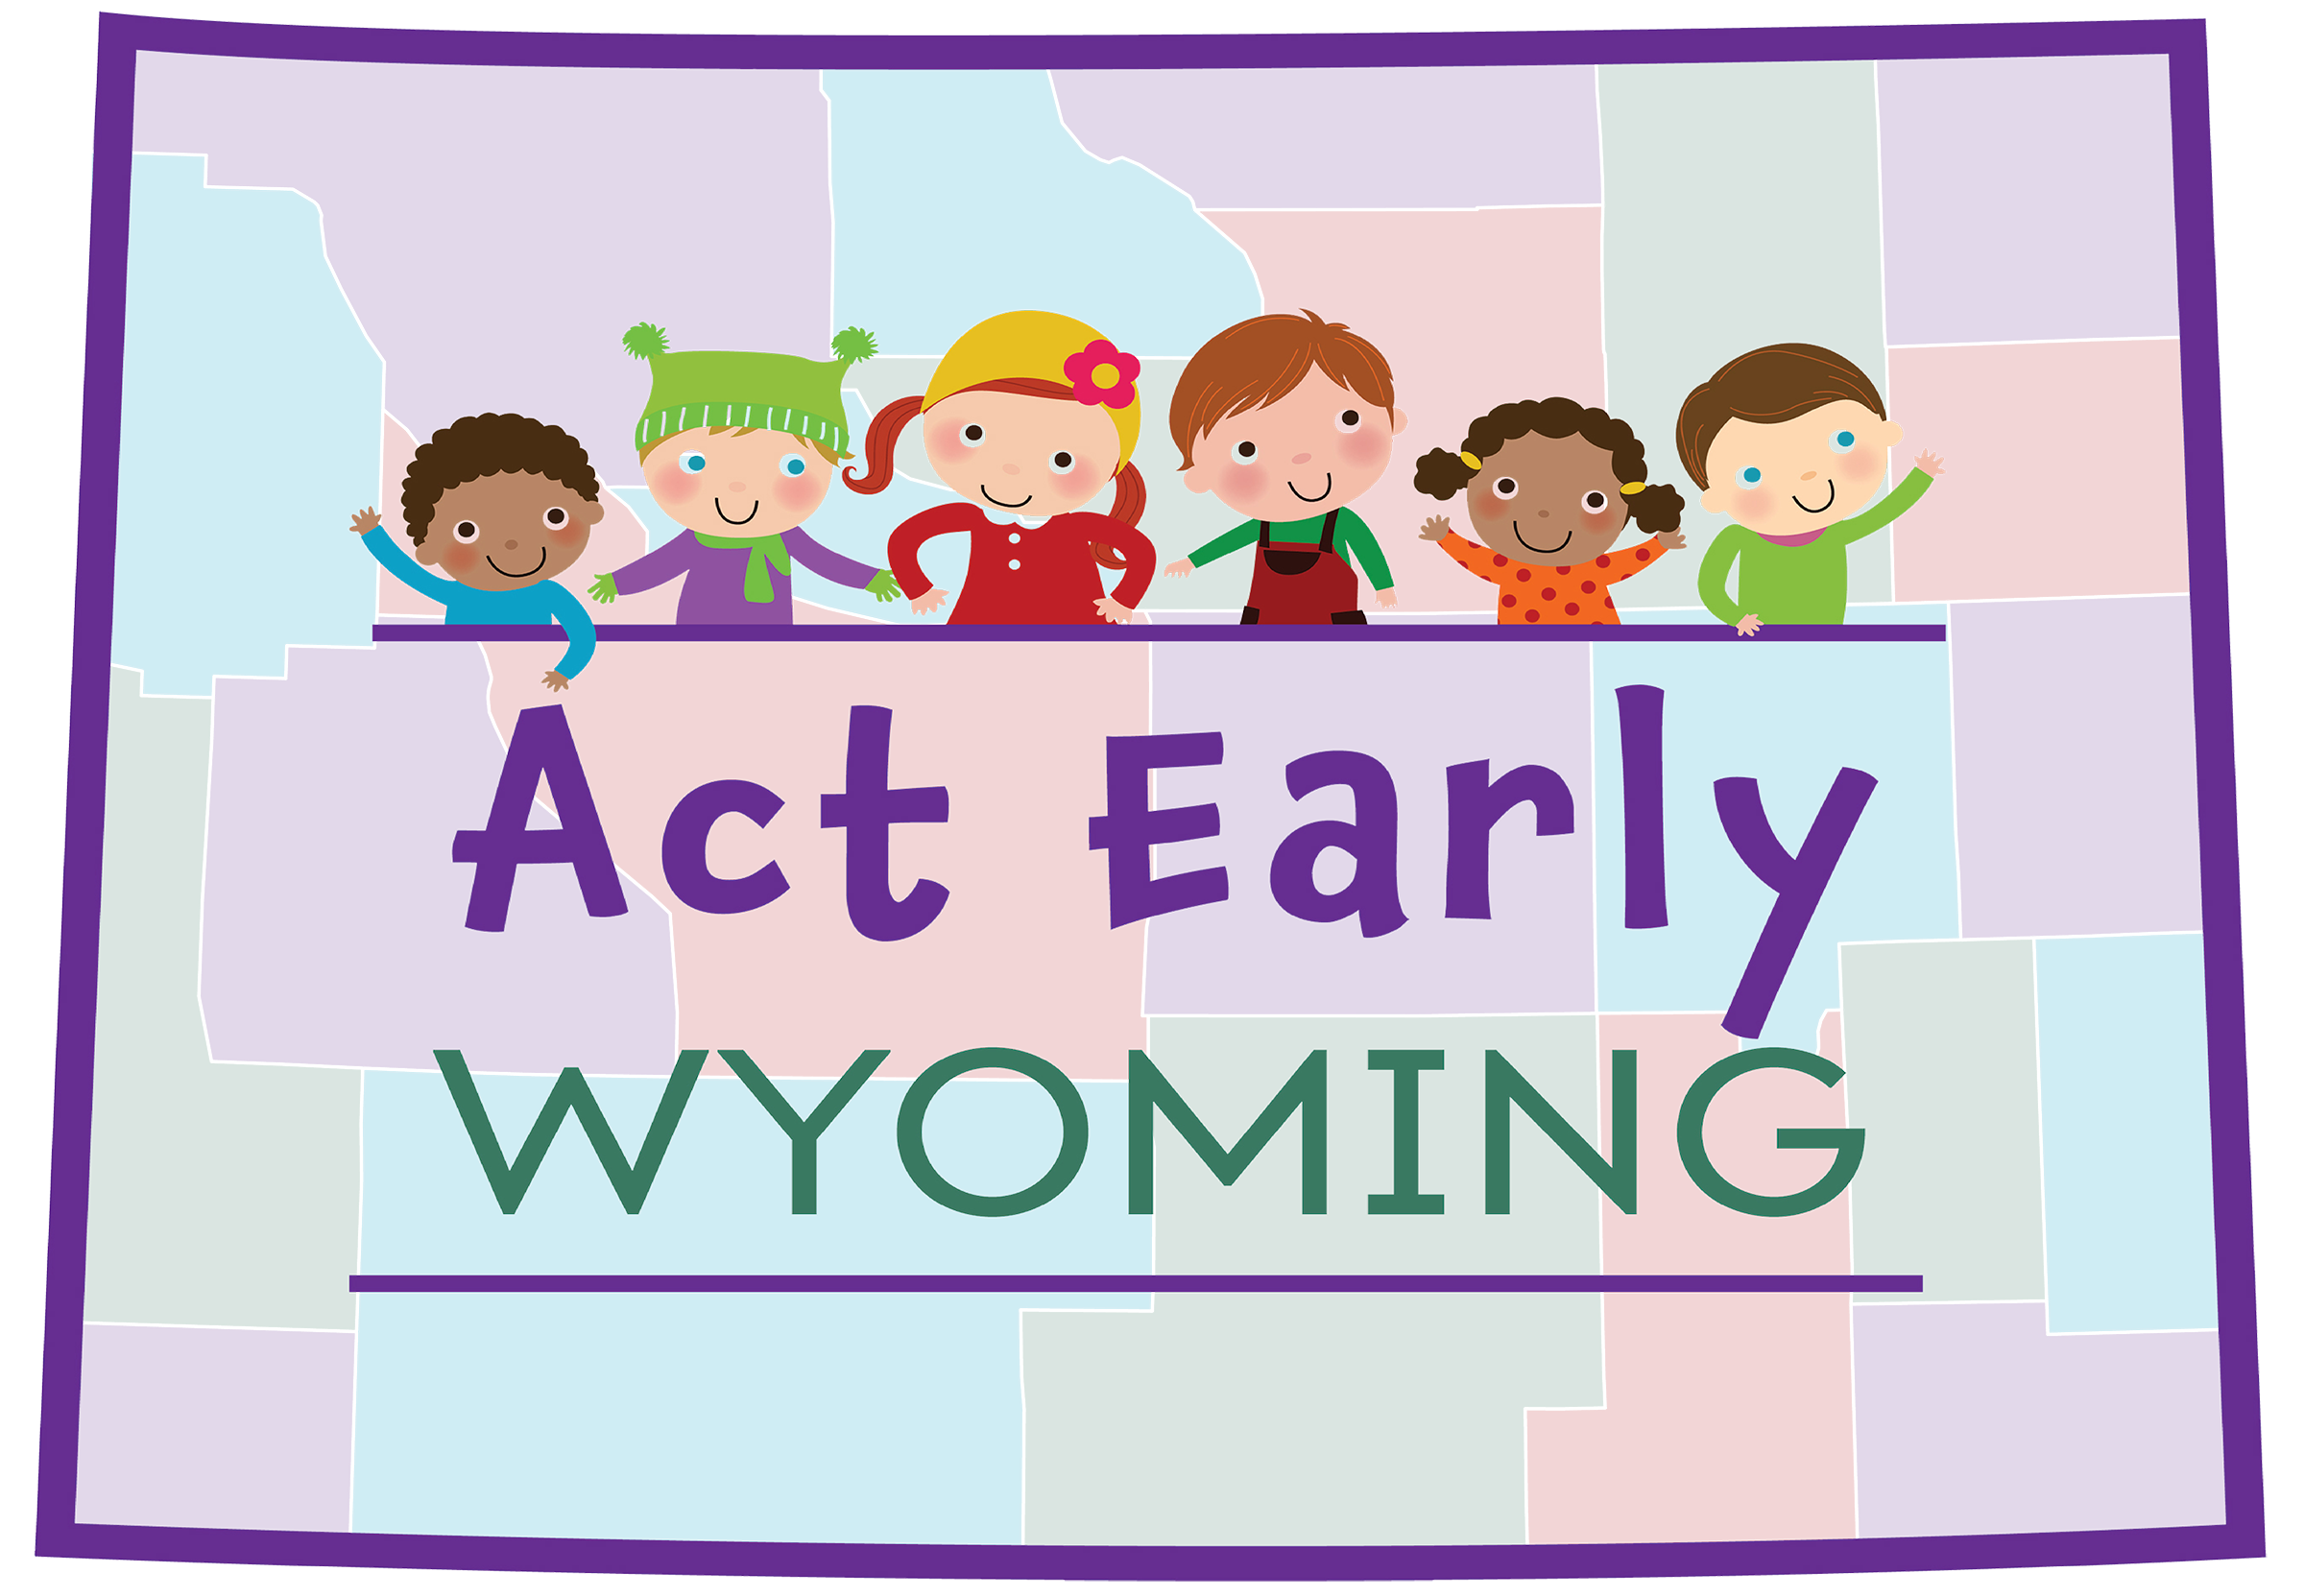 Act Early Wyoming logo with cartoon children